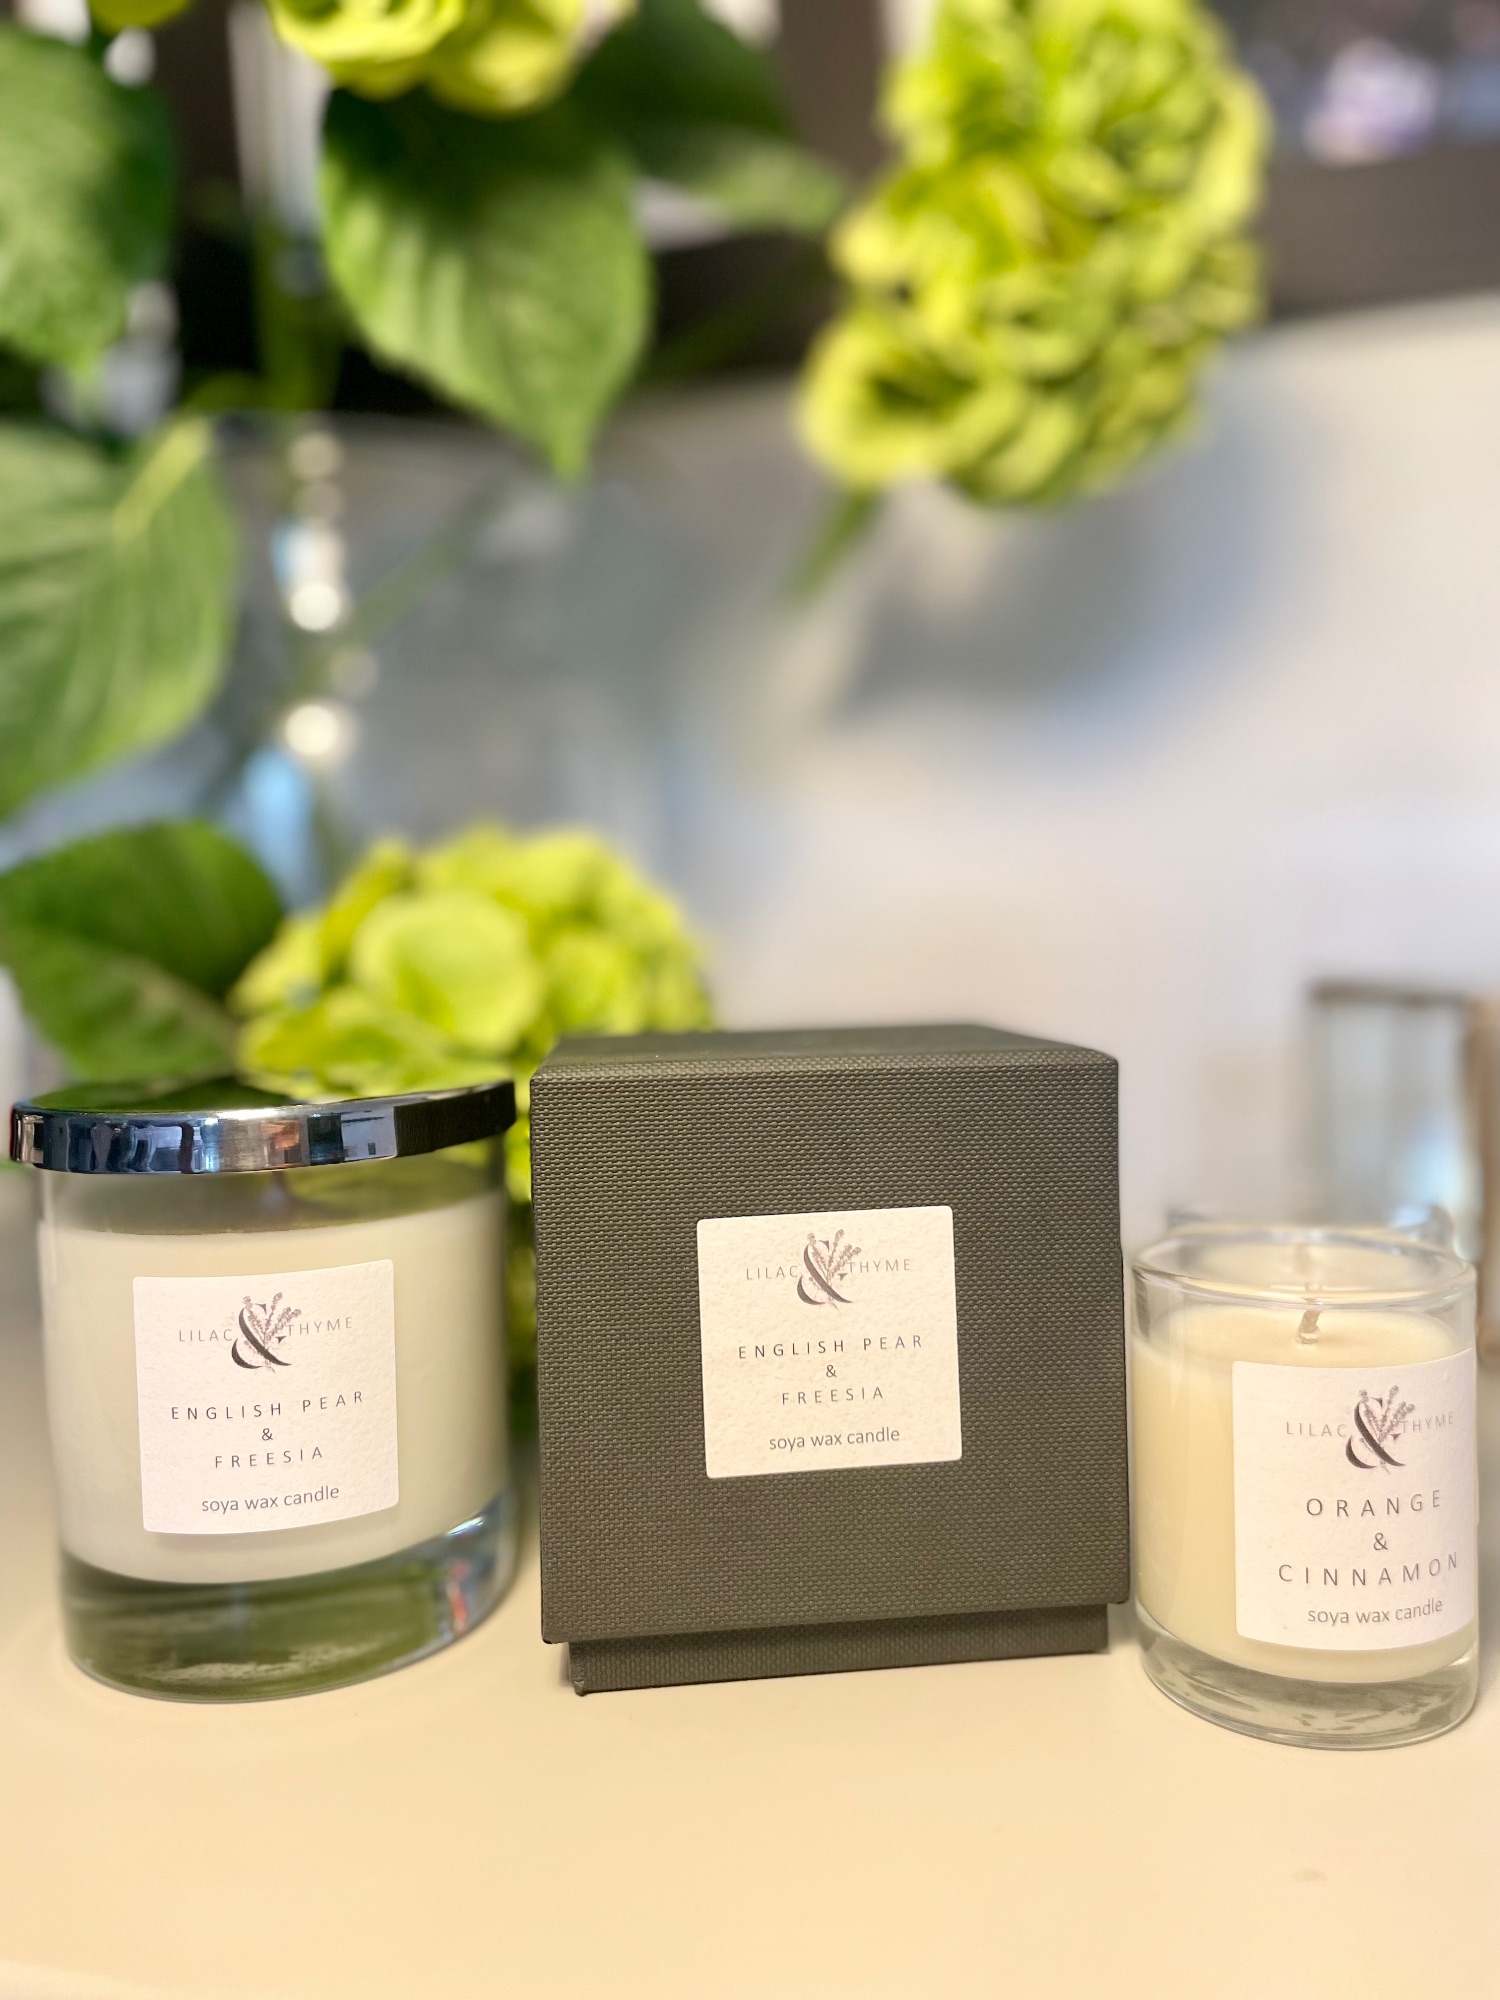 Lilac and Thyme, the home of beautiful hand-crafted candles